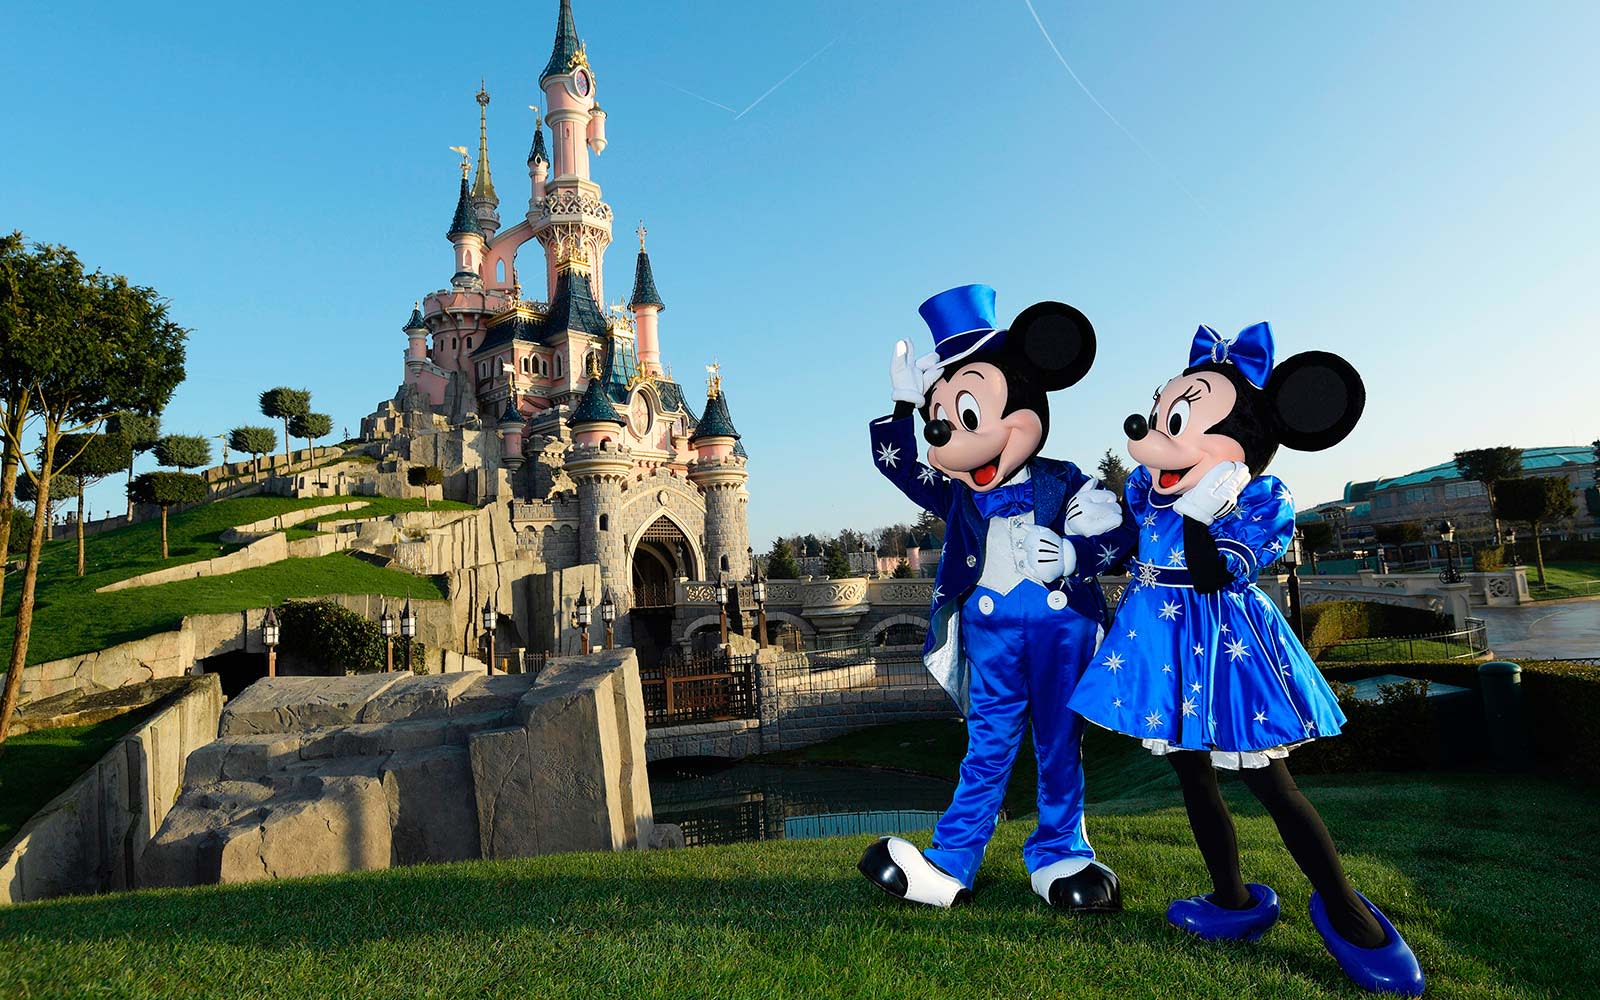 People Keep Scattering Ashes at Disney Theme Parks - and Custodians Are Ove...